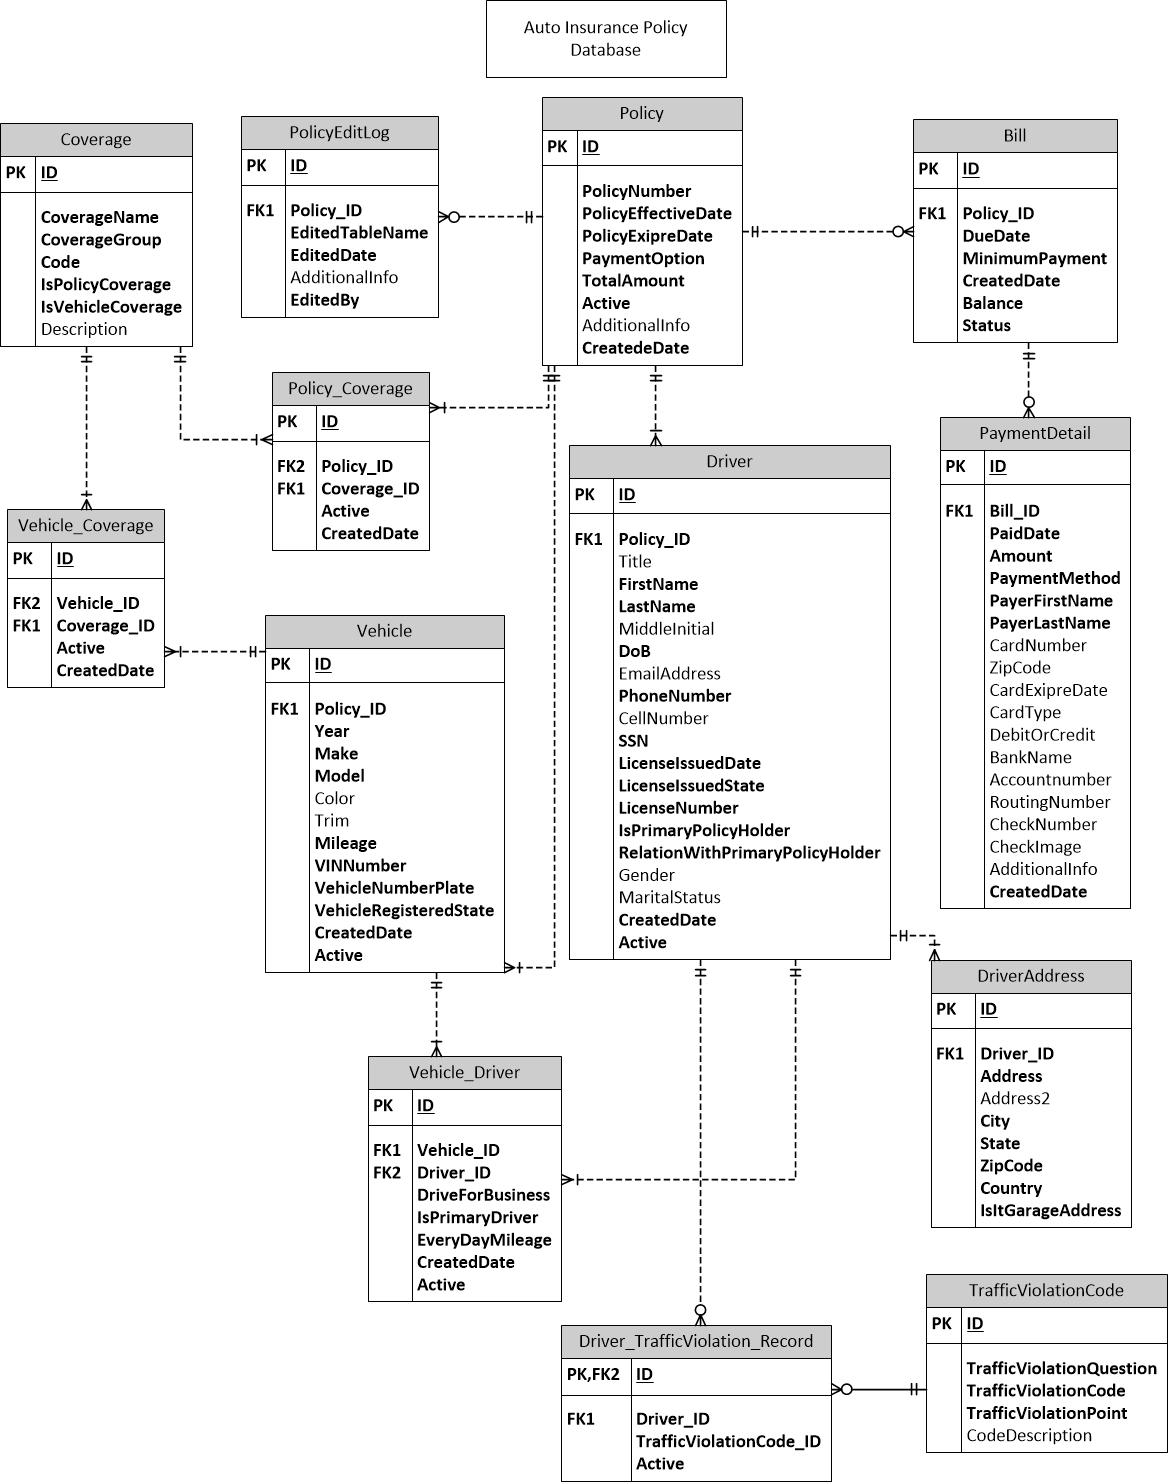 Relational Database Design With An Auto Insurance Database Sample throughout Er Diagram Examples For Insurance